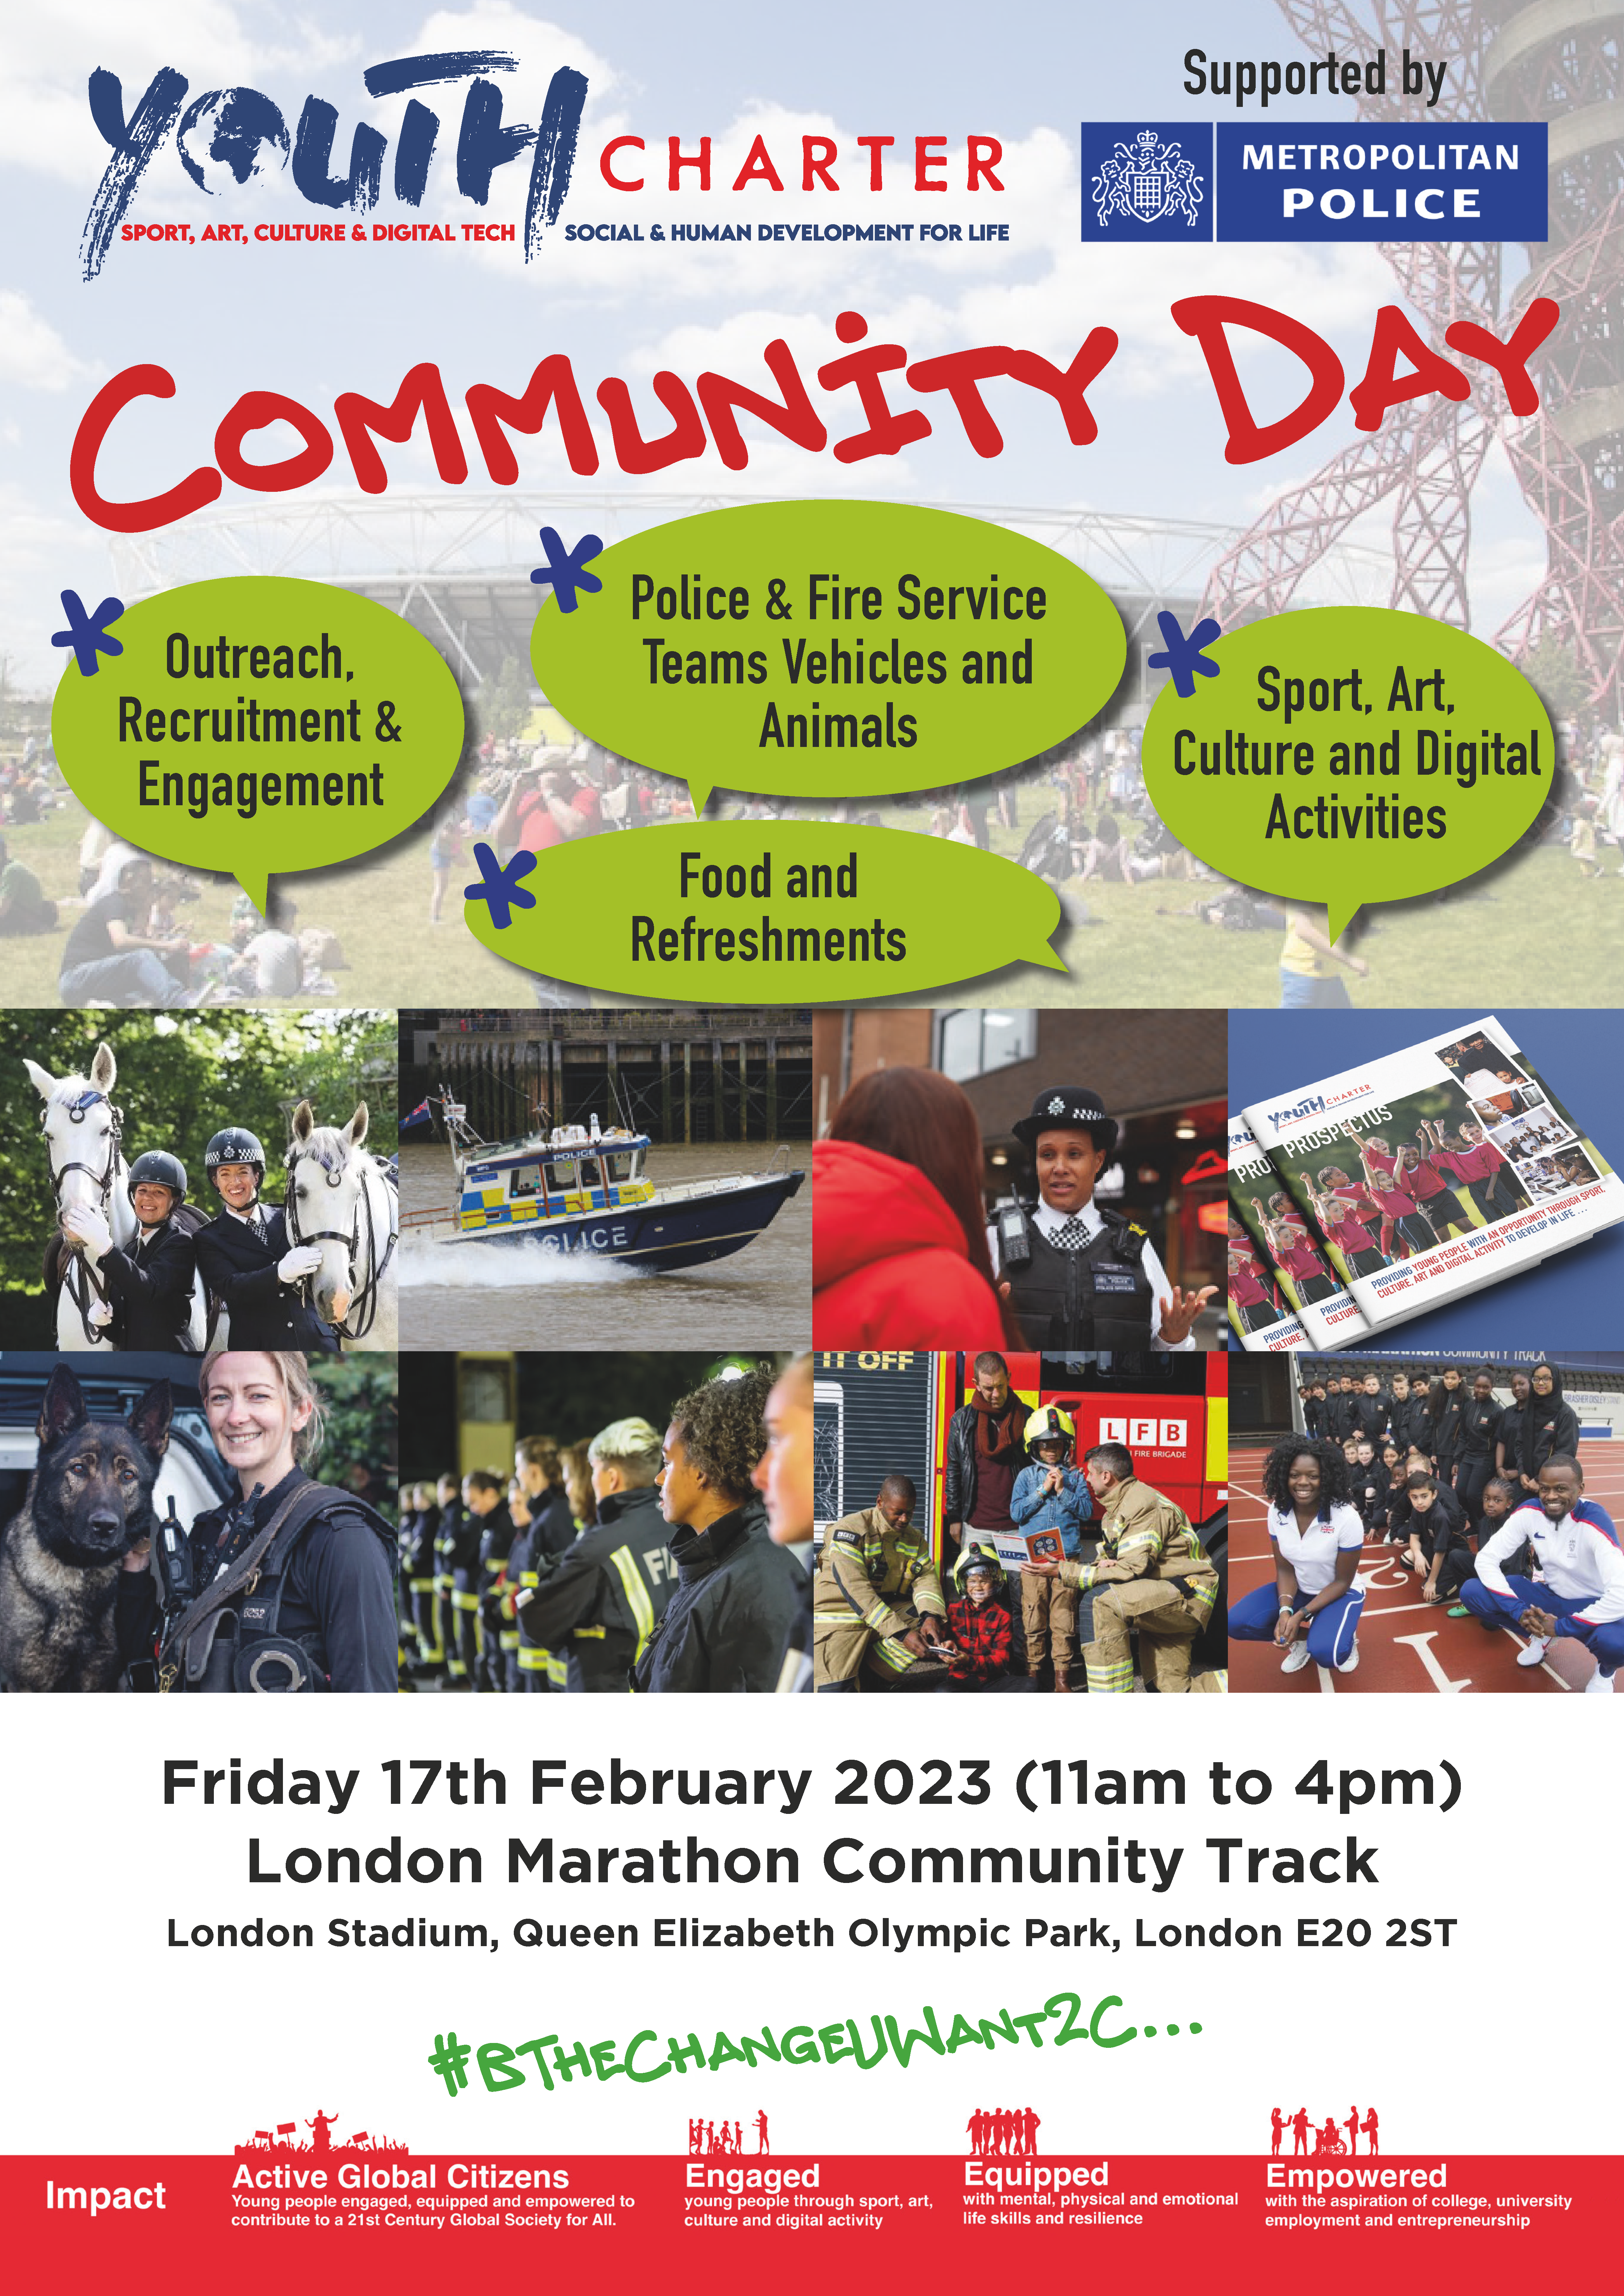 Youth Charter Community Day supported by Met Police